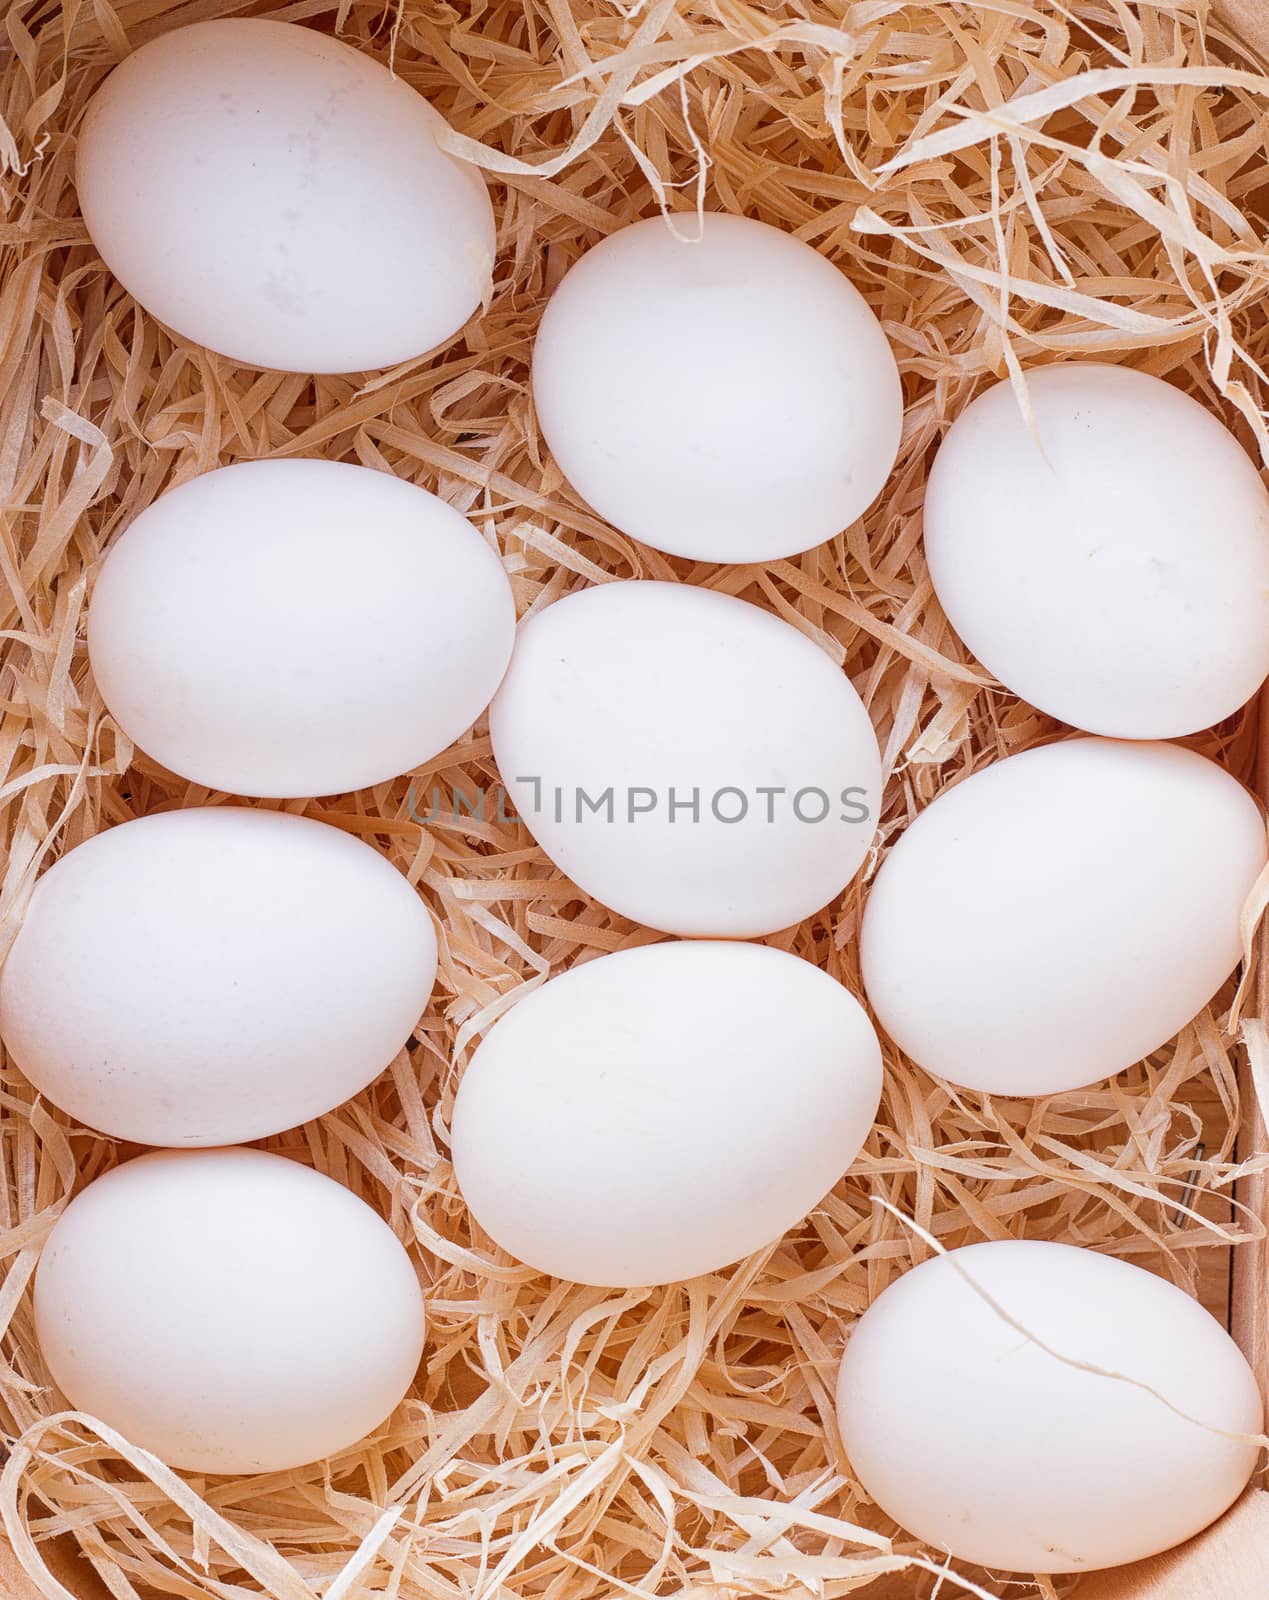 A lot of white chicken eggs in a bunch